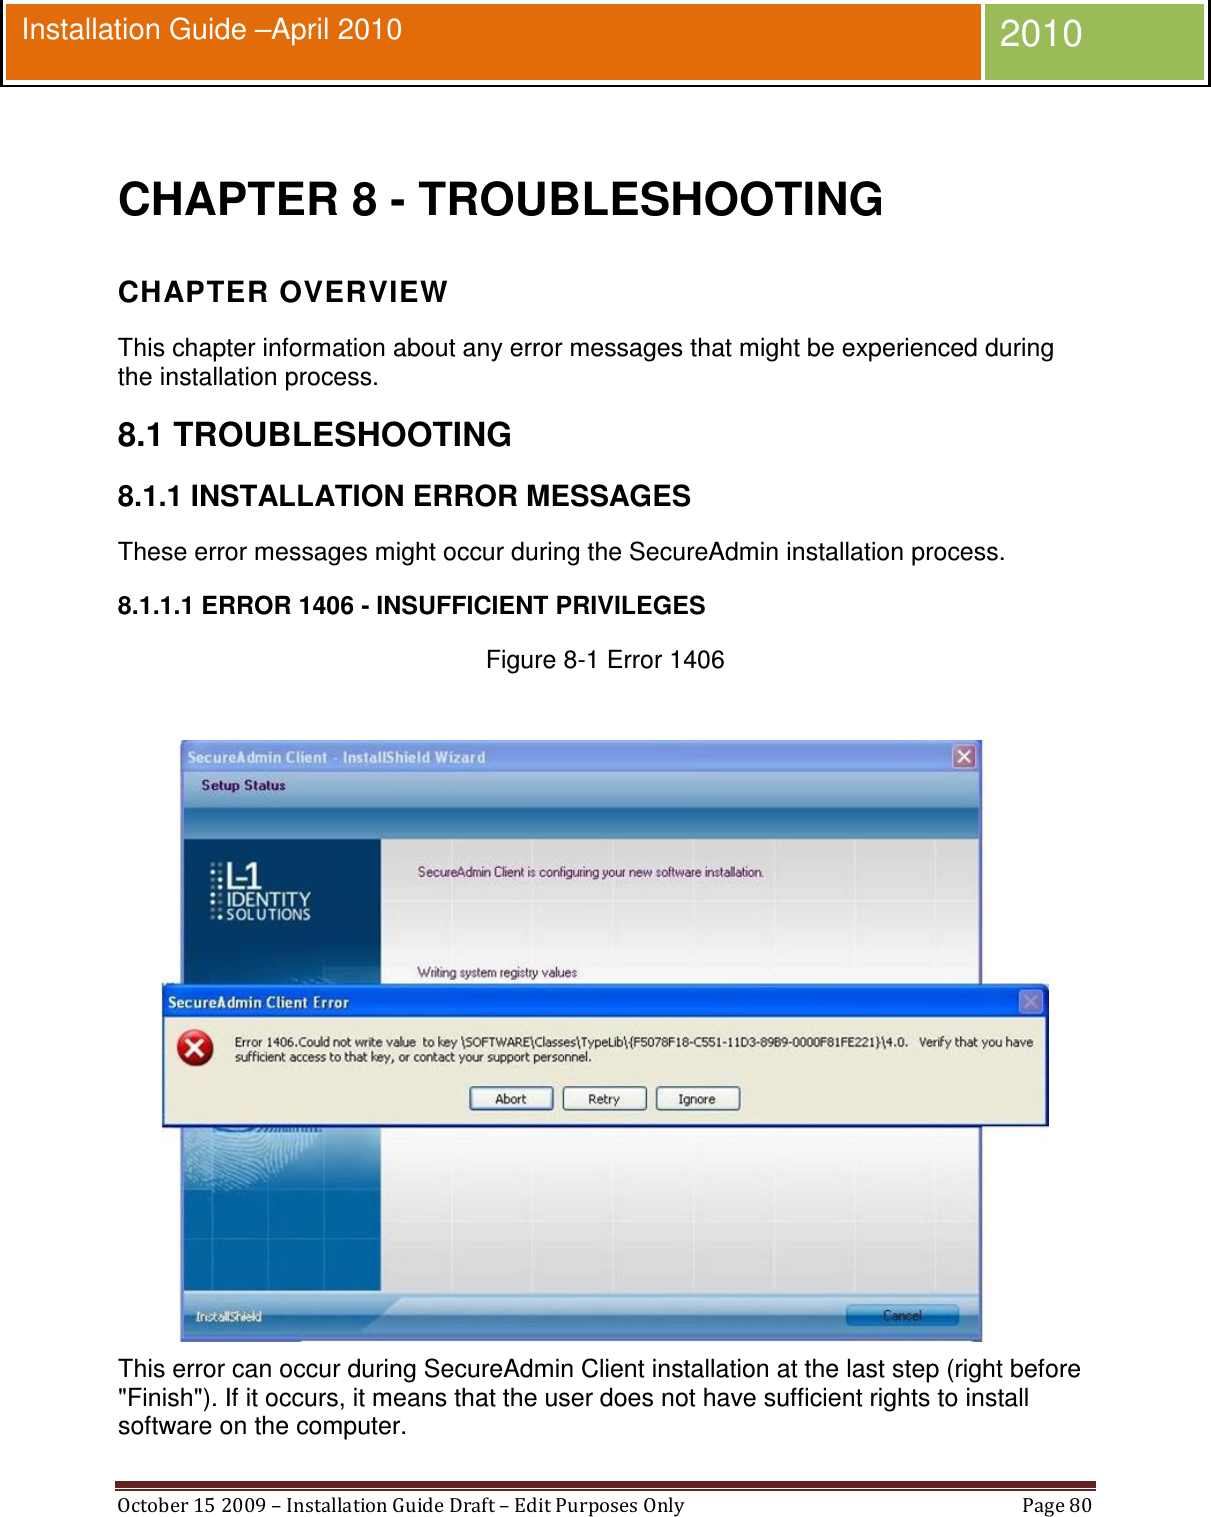  October 15 2009 – Installation Guide Draft – Edit Purposes Only  Page 80  Installation Guide –April 2010 2010  CHAPTER 8 - TROUBLESHOOTING CHAPTER OVERVIEW This chapter information about any error messages that might be experienced during the installation process. 8.1 TROUBLESHOOTING 8.1.1 INSTALLATION ERROR MESSAGES These error messages might occur during the SecureAdmin installation process. 8.1.1.1 ERROR 1406 - INSUFFICIENT PRIVILEGES Figure 8-1 Error 1406   This error can occur during SecureAdmin Client installation at the last step (right before &quot;Finish&quot;). If it occurs, it means that the user does not have sufficient rights to install software on the computer. 